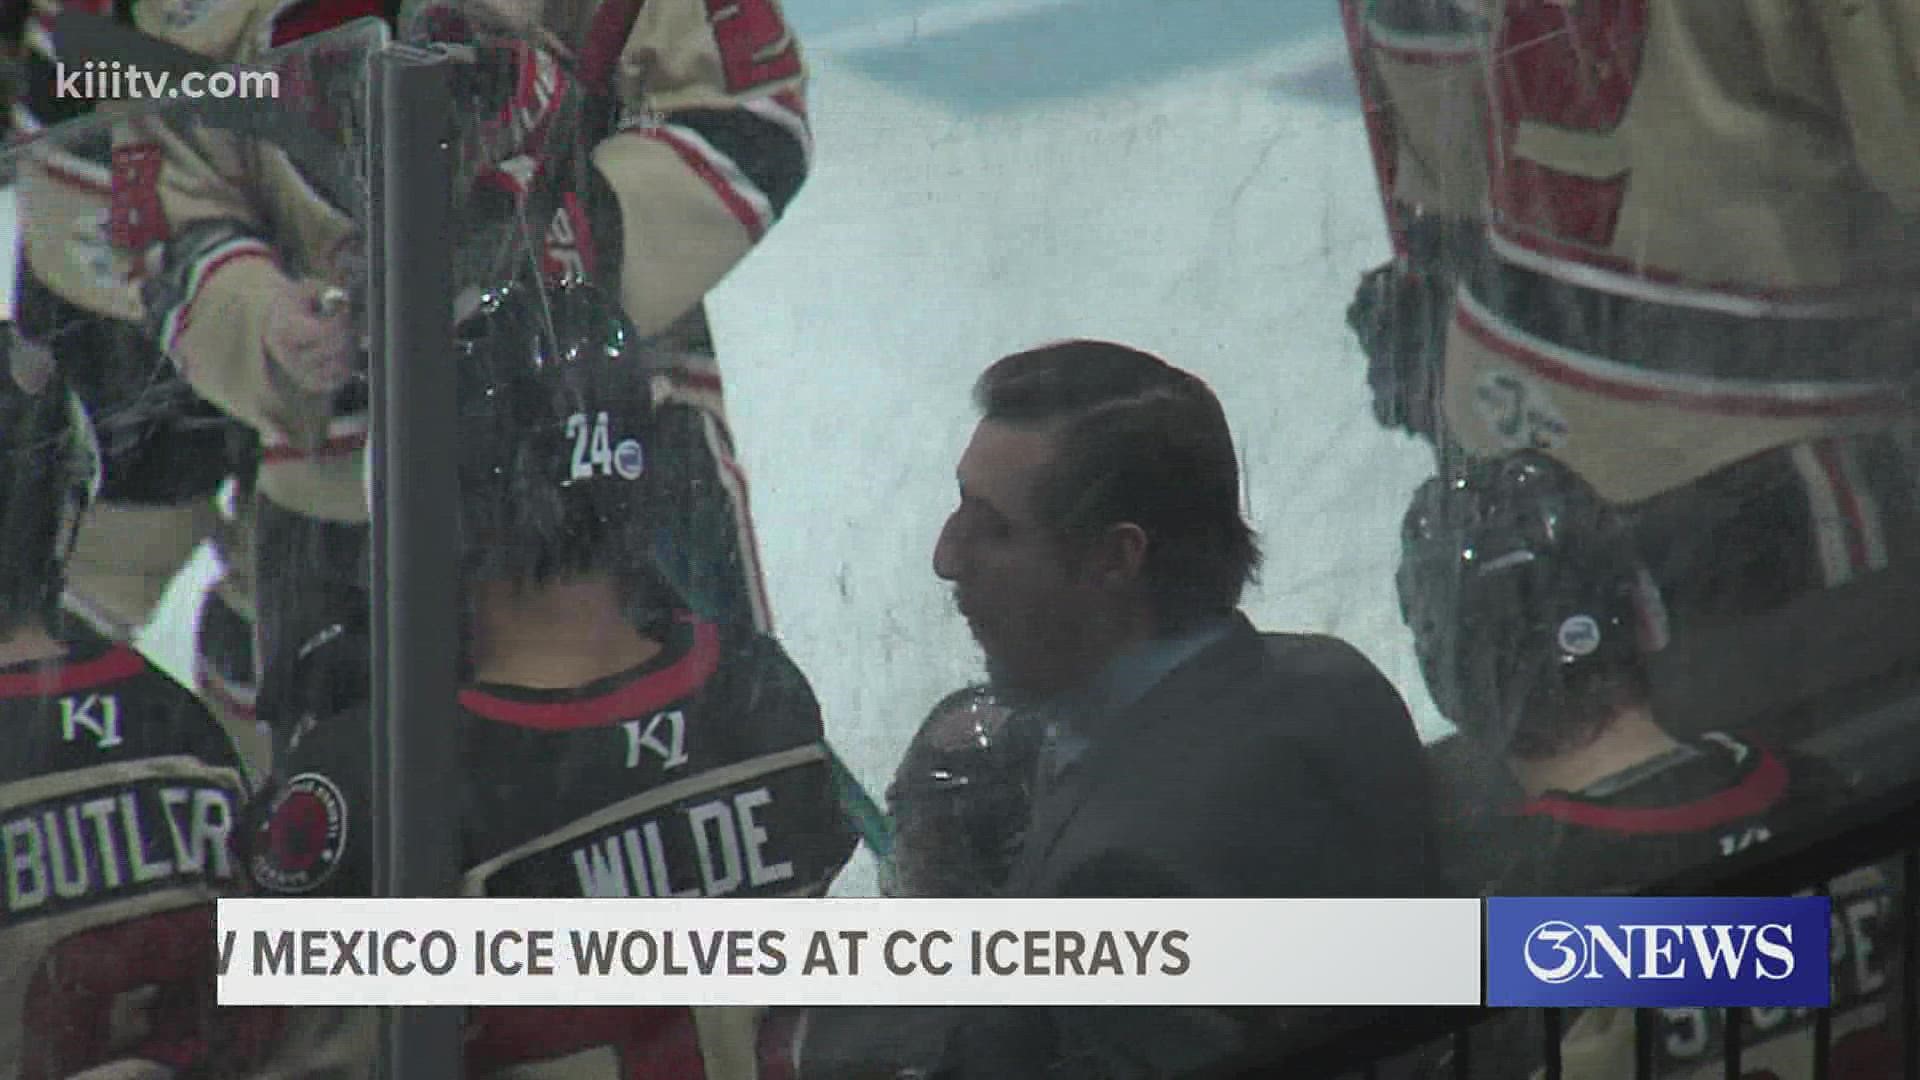 Corpus Christi couldn't shut down the Ice Wolves in the second period in a 4-1 loss Friday night.